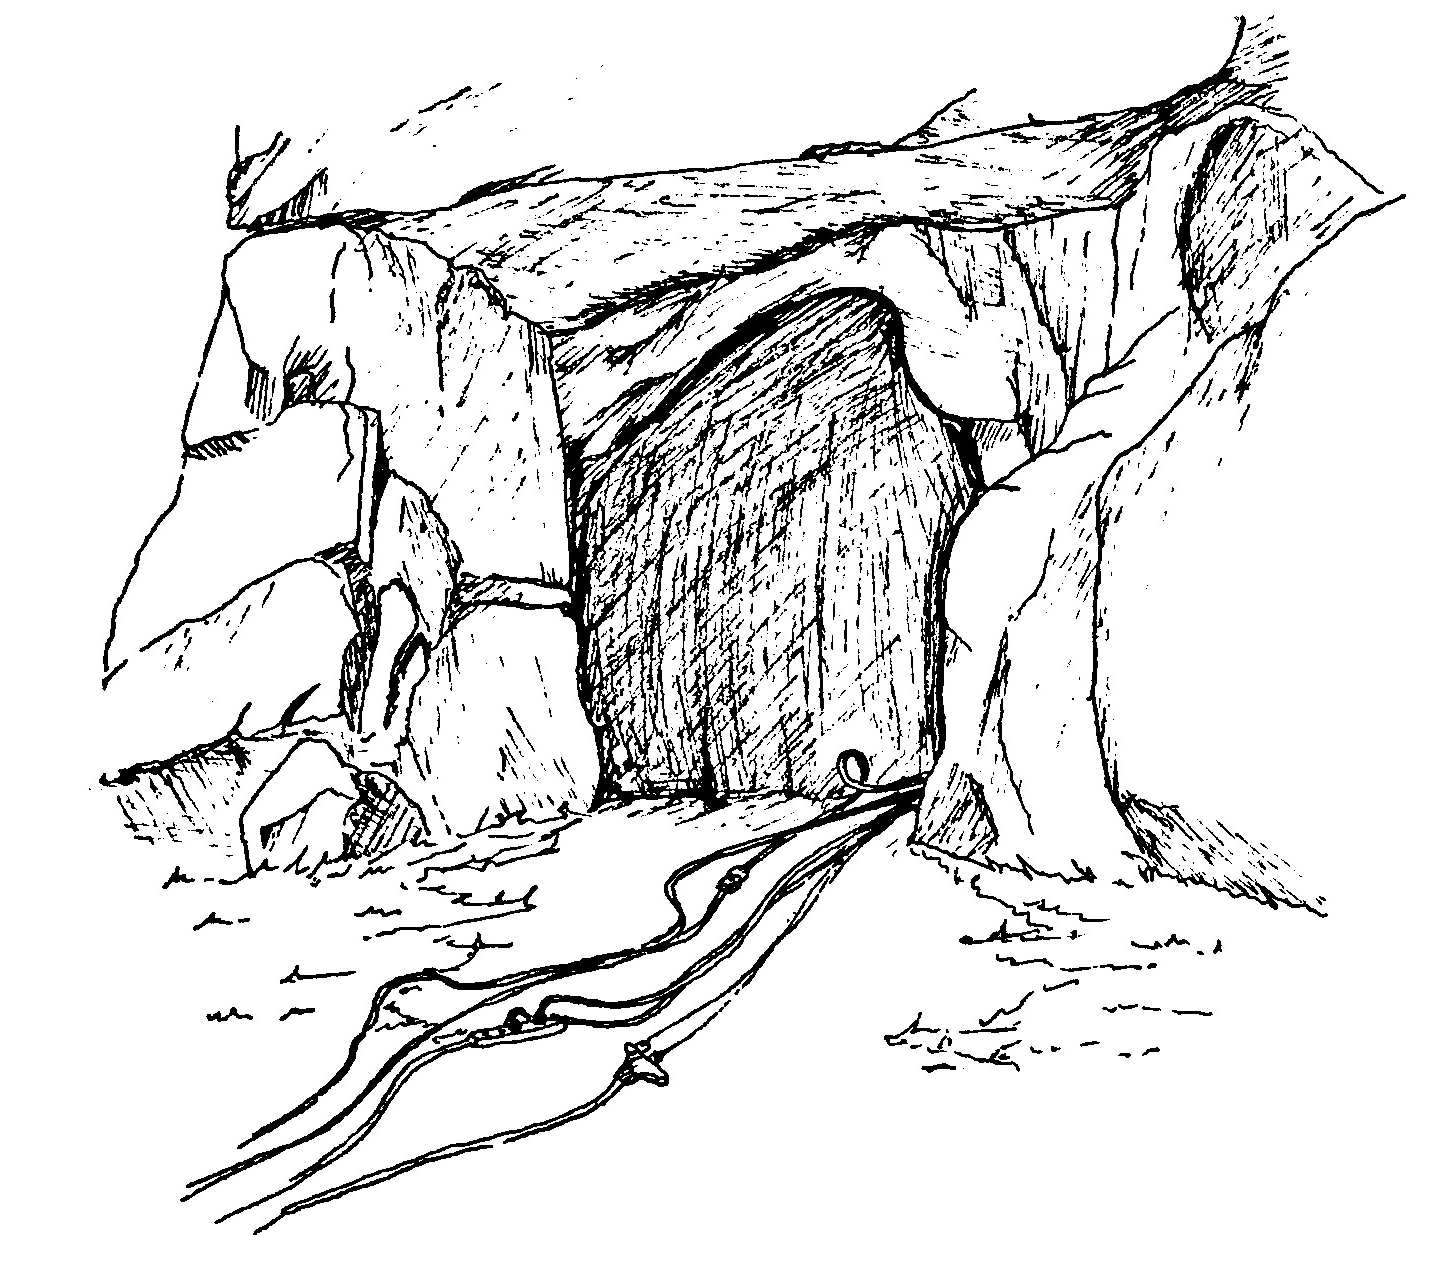 An illustration of several cables and wires trailing out of the dragon's dark cave